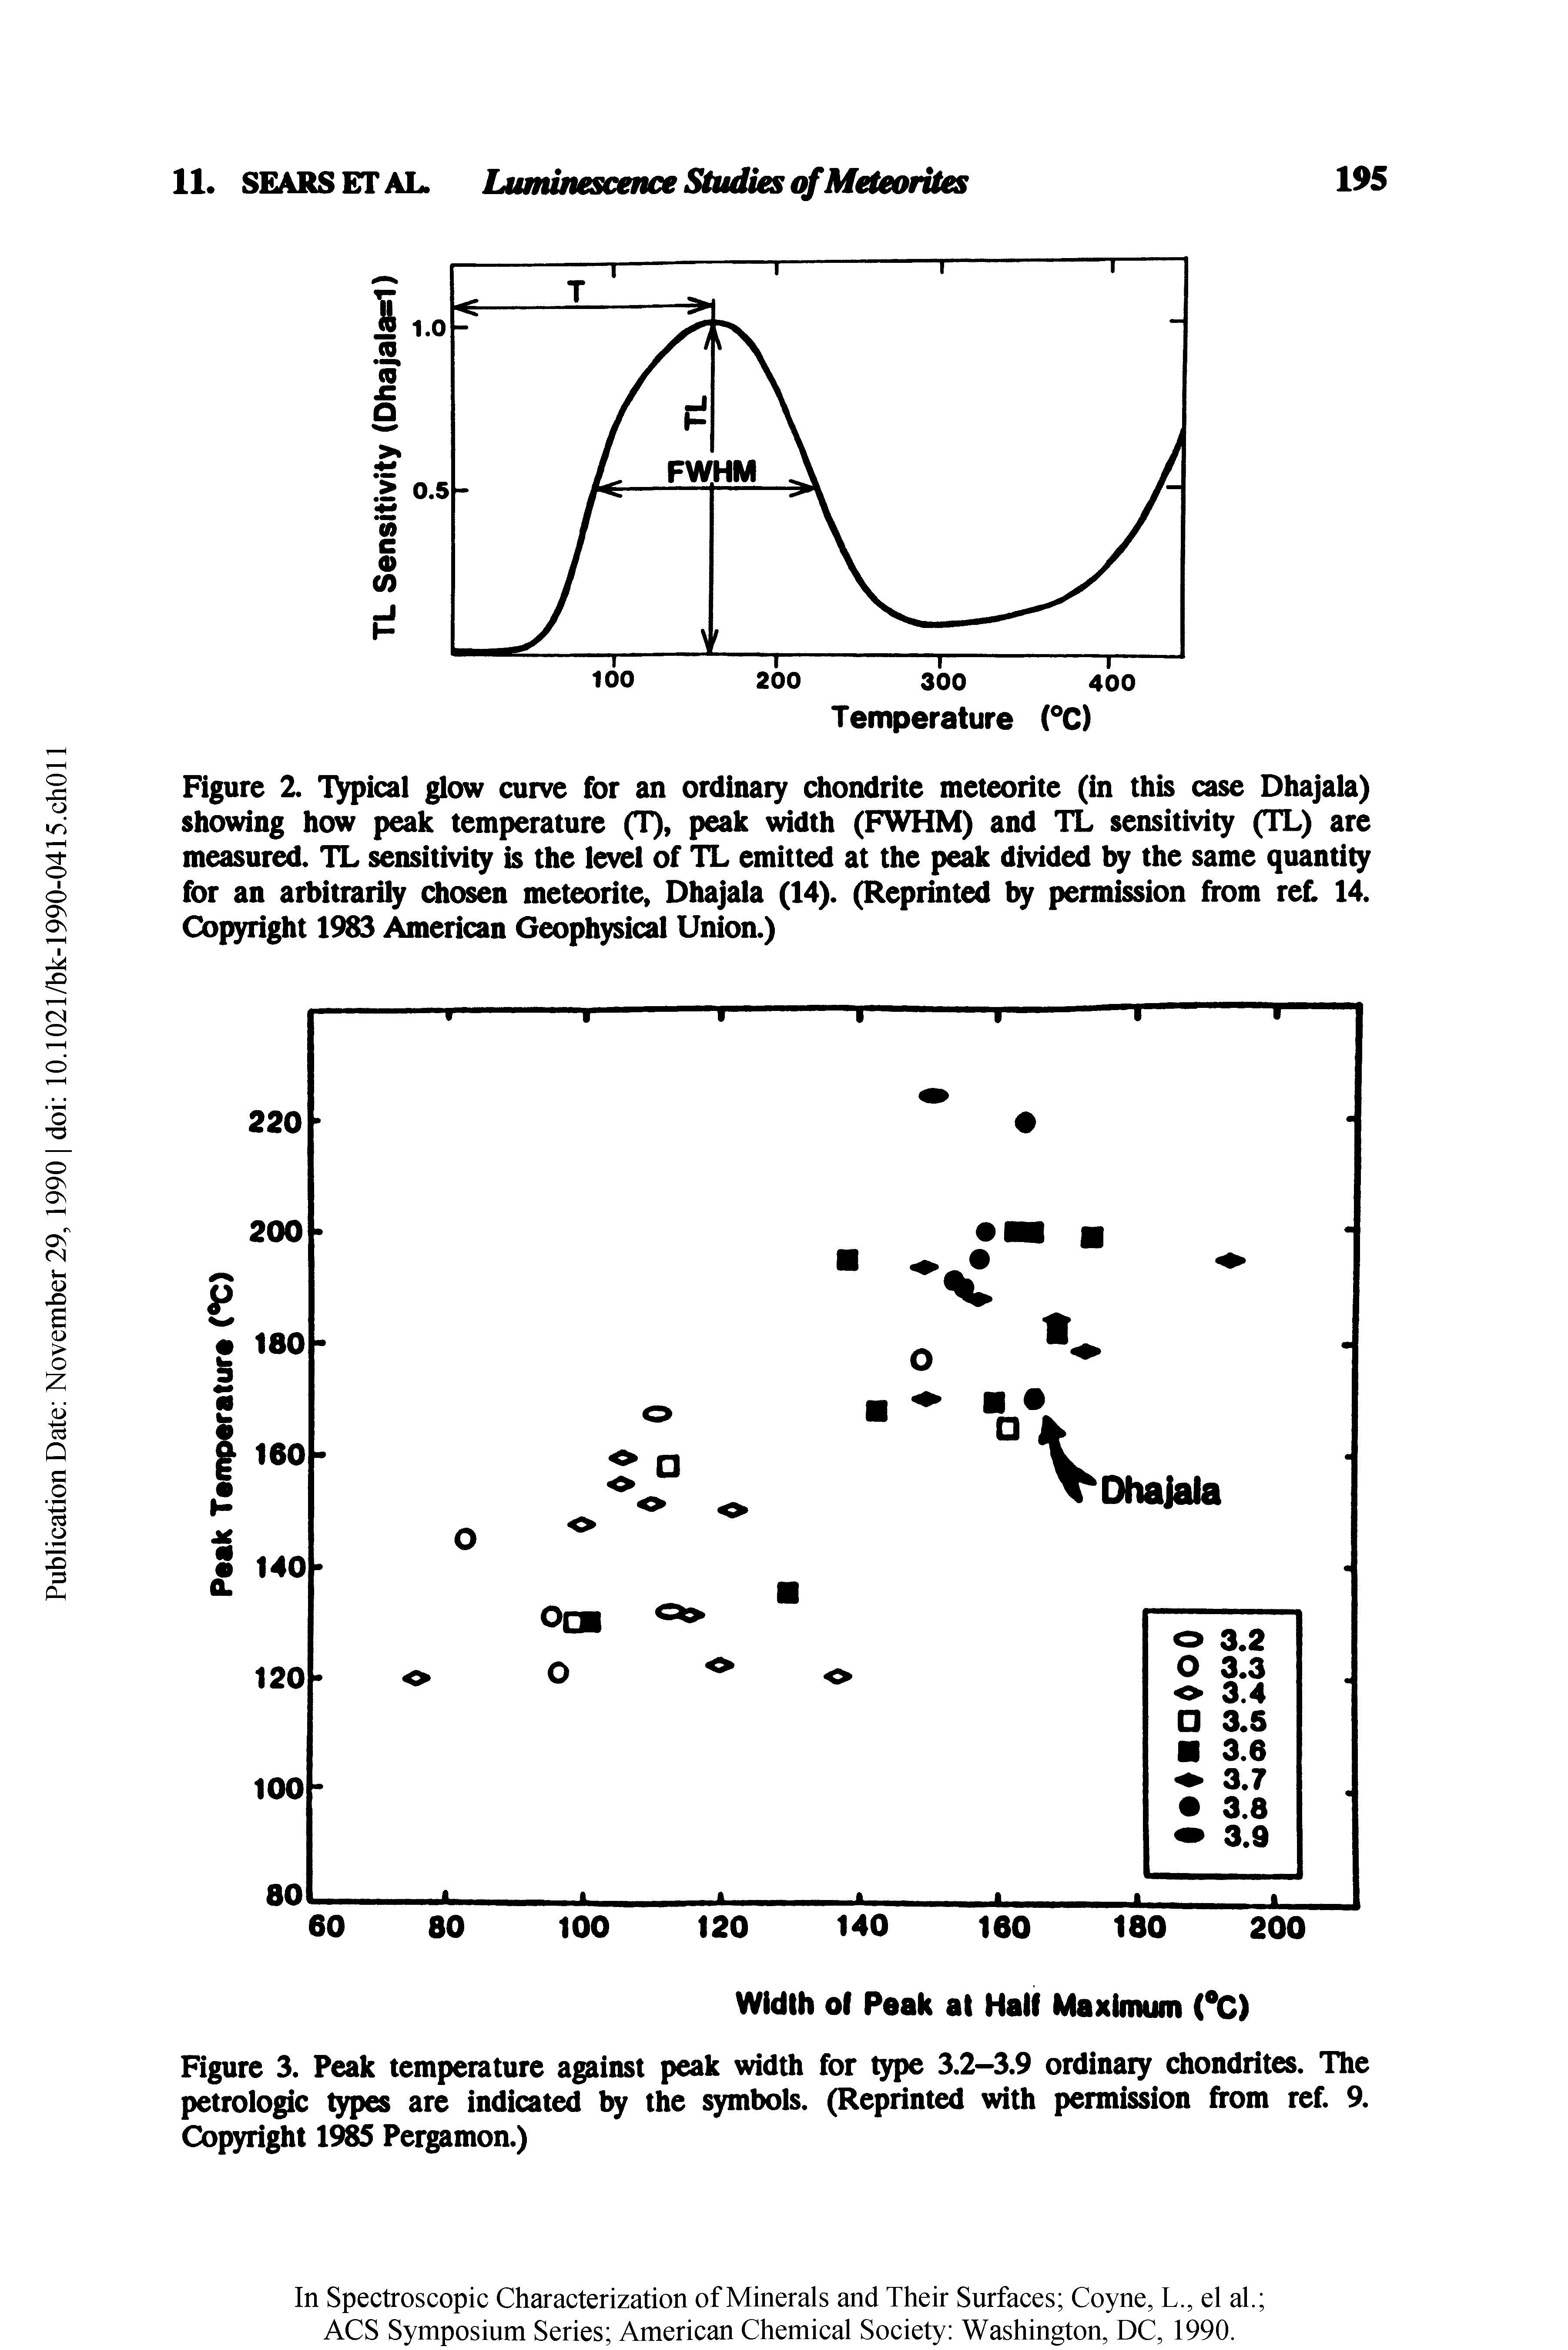 Figure 2. Typical glow curve for an ordinary chondrite meteorite (in this case Dhajala) showing how peak temperature (T), peak width (FWHM) and TL sensitivity (TL) are measured. TL sensitivity is the level of TL emitted at the peak divided by the same quantity for an arbitrarily chosen meteorite, Dhajala (14). (Reprinted by permission from ref, 14. Copyright 1983 American Geophysical Union.)...